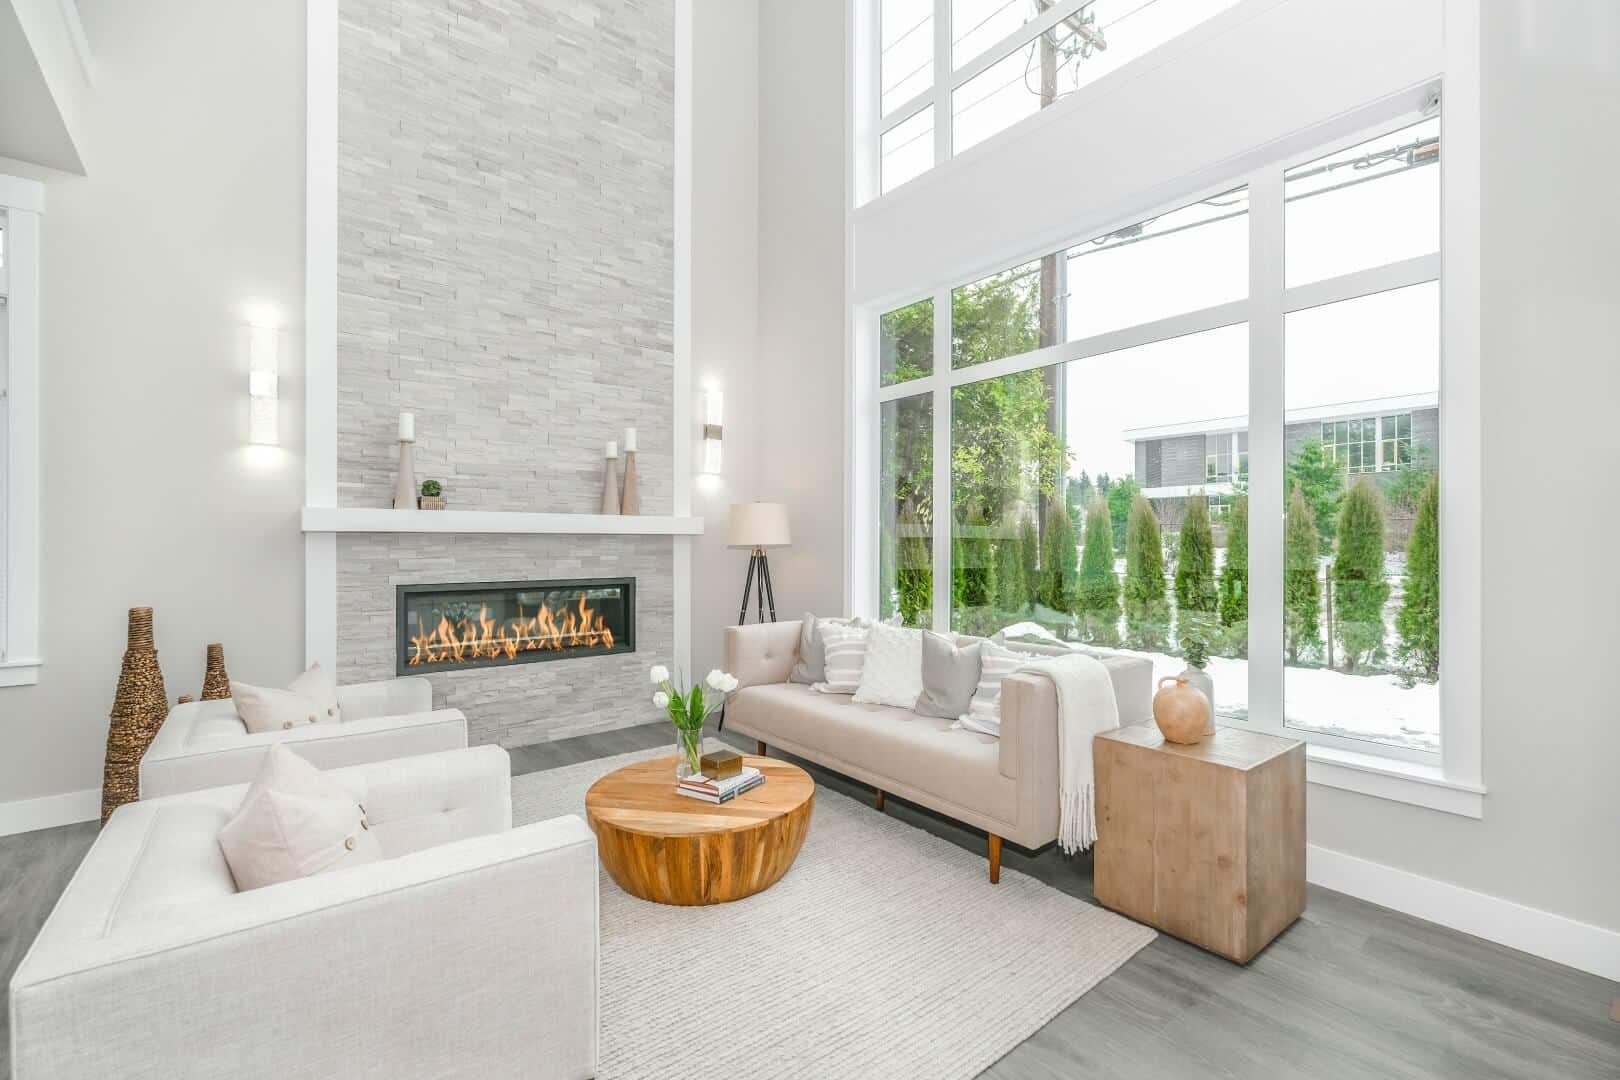 Very bright and white living room with big windows